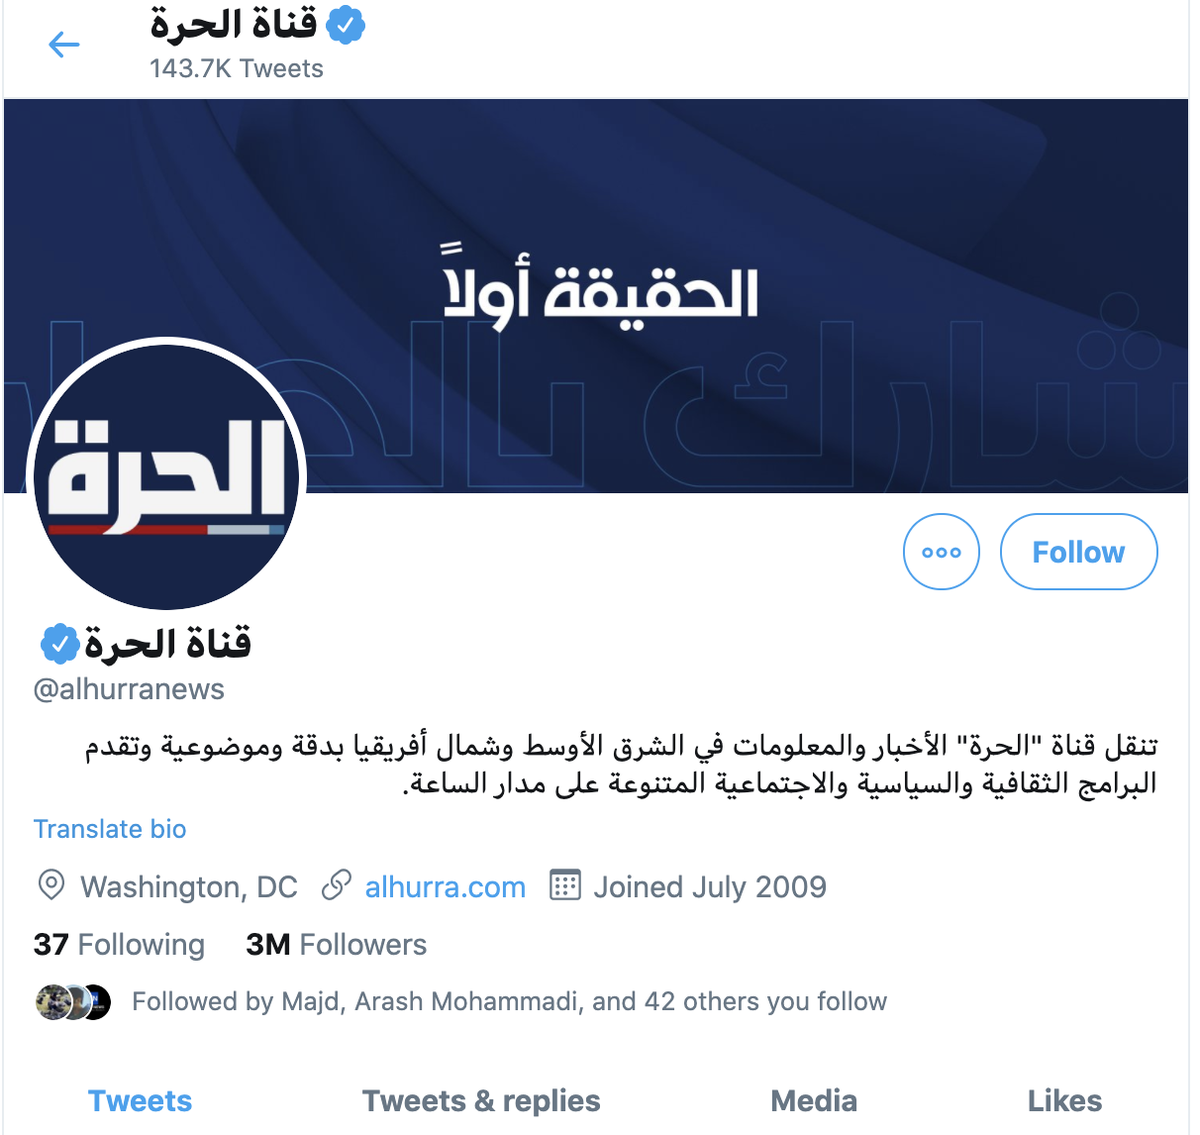 Russia's Tass news agency has been labelled. Ruptly, a division of RT, has also been handed a label. France 24 and Al Hurra have not been labelled. DM me please if you think there are any other media outlets that I should check and add to this thread